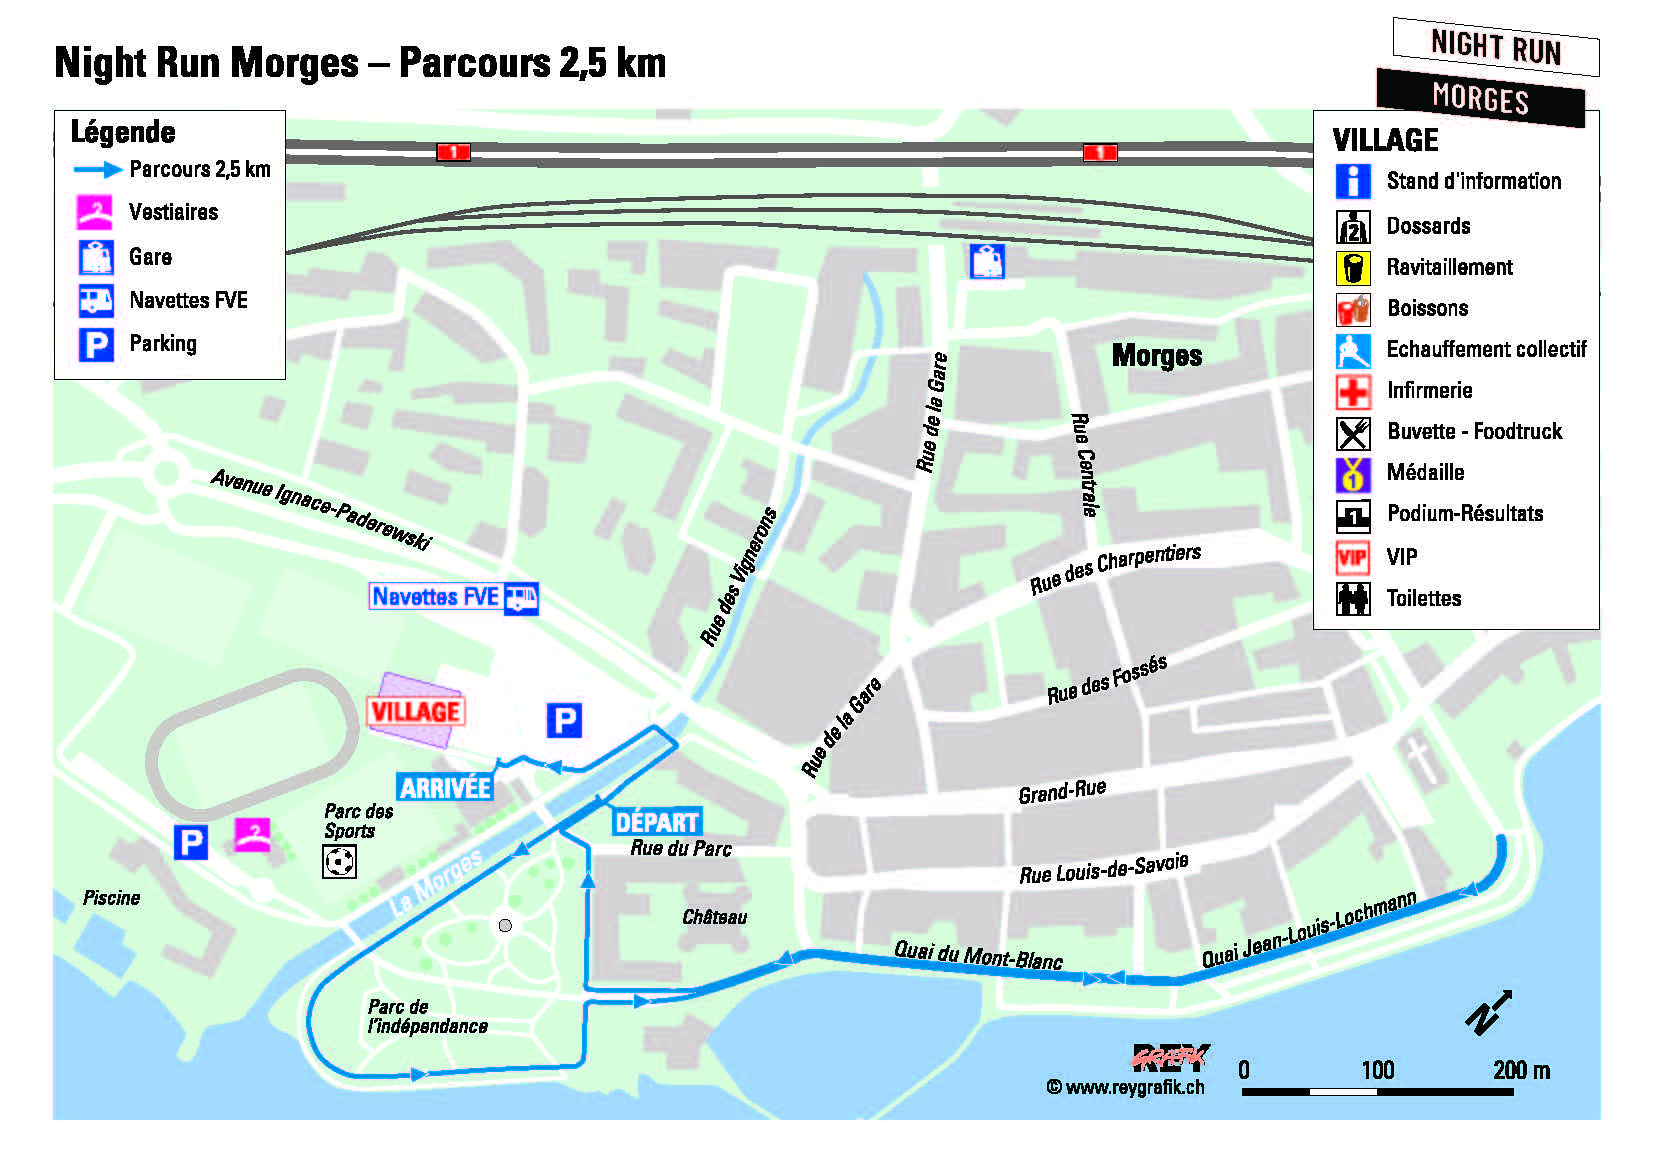 Parcours 2.5km Night Run Morges